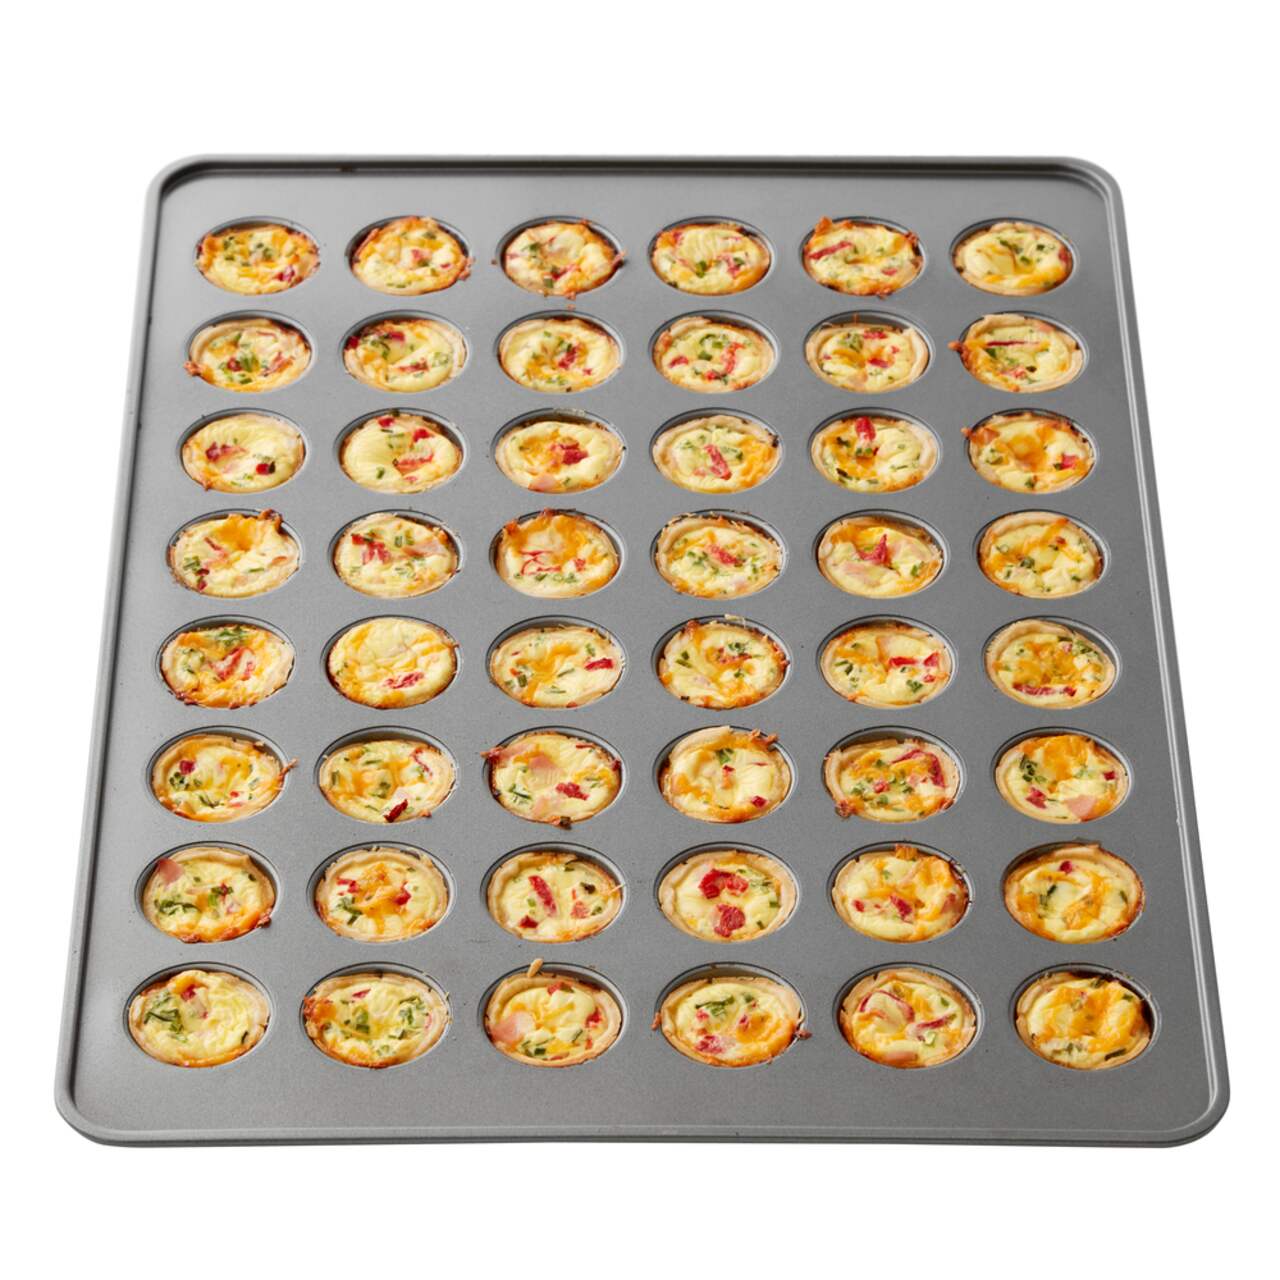 https://media-www.canadiantire.ca/product/living/kitchen/bakeware-baking-prep/1429067/wilton-mega-48-cup-mini-muffin-pan-f7bd3dd8-8af1-475b-bf16-70c9add4913b.png?imdensity=1&imwidth=1244&impolicy=mZoom